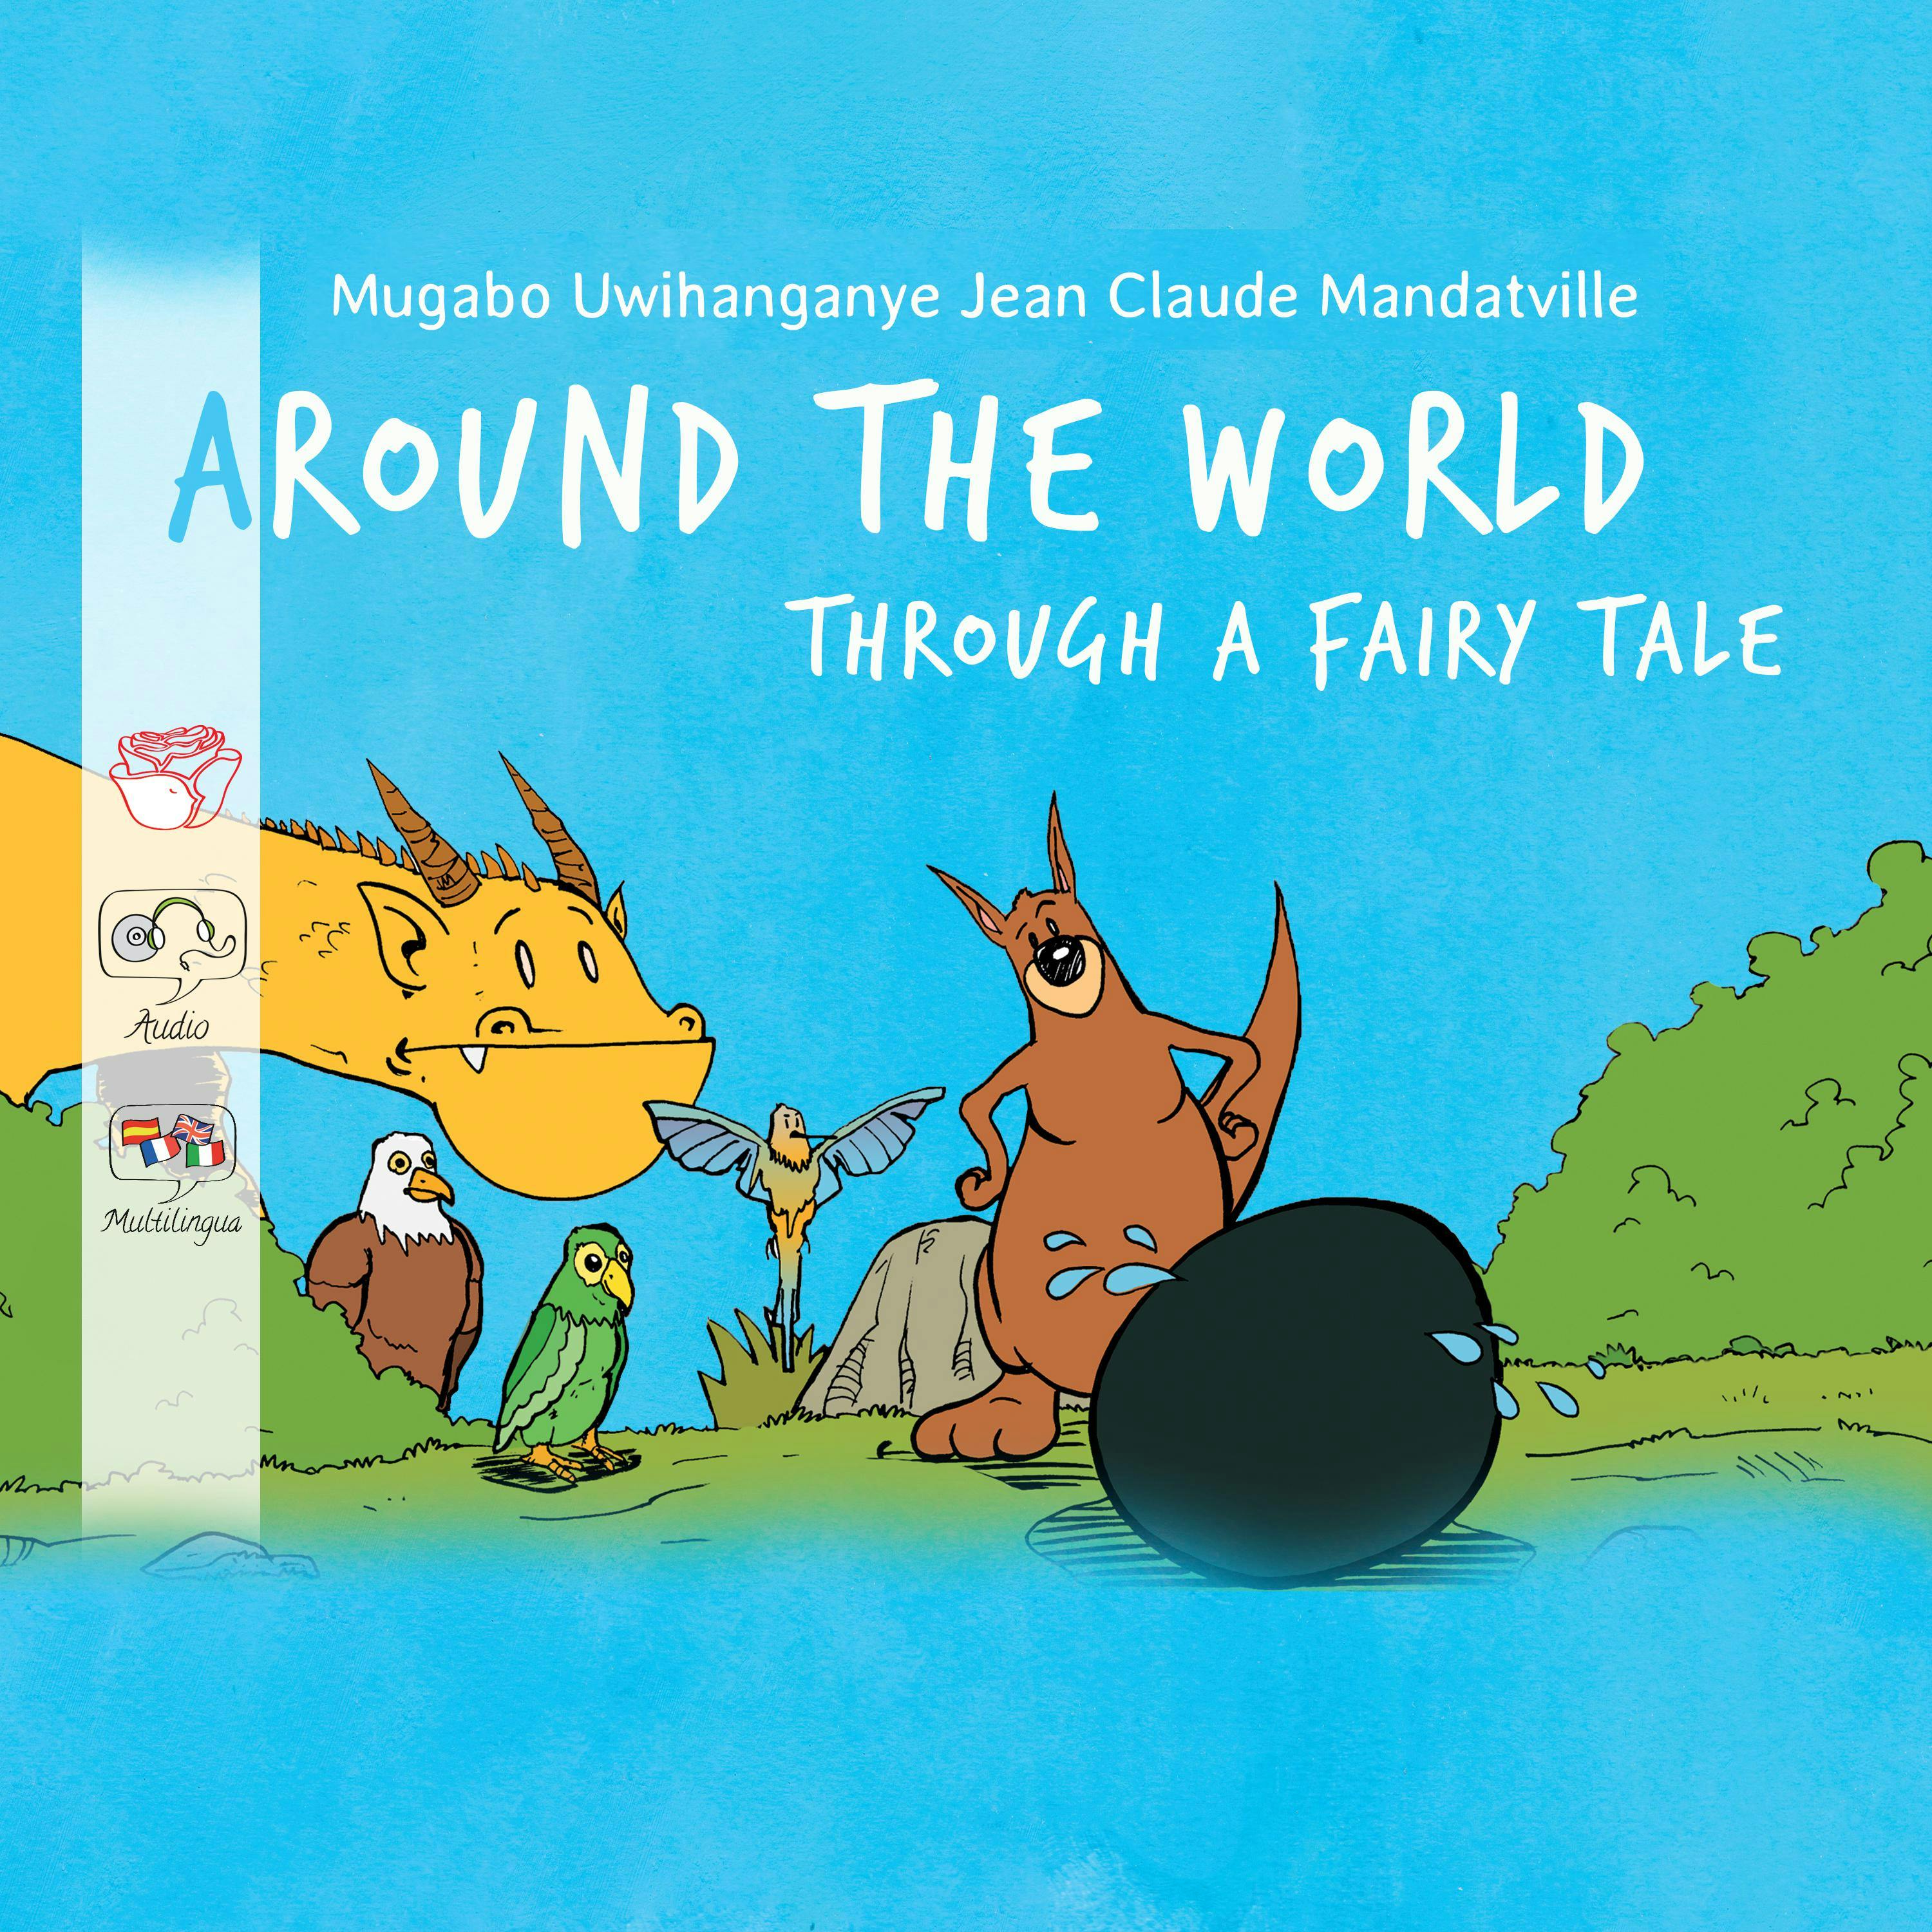 Around the world through a fairy tale - undefined